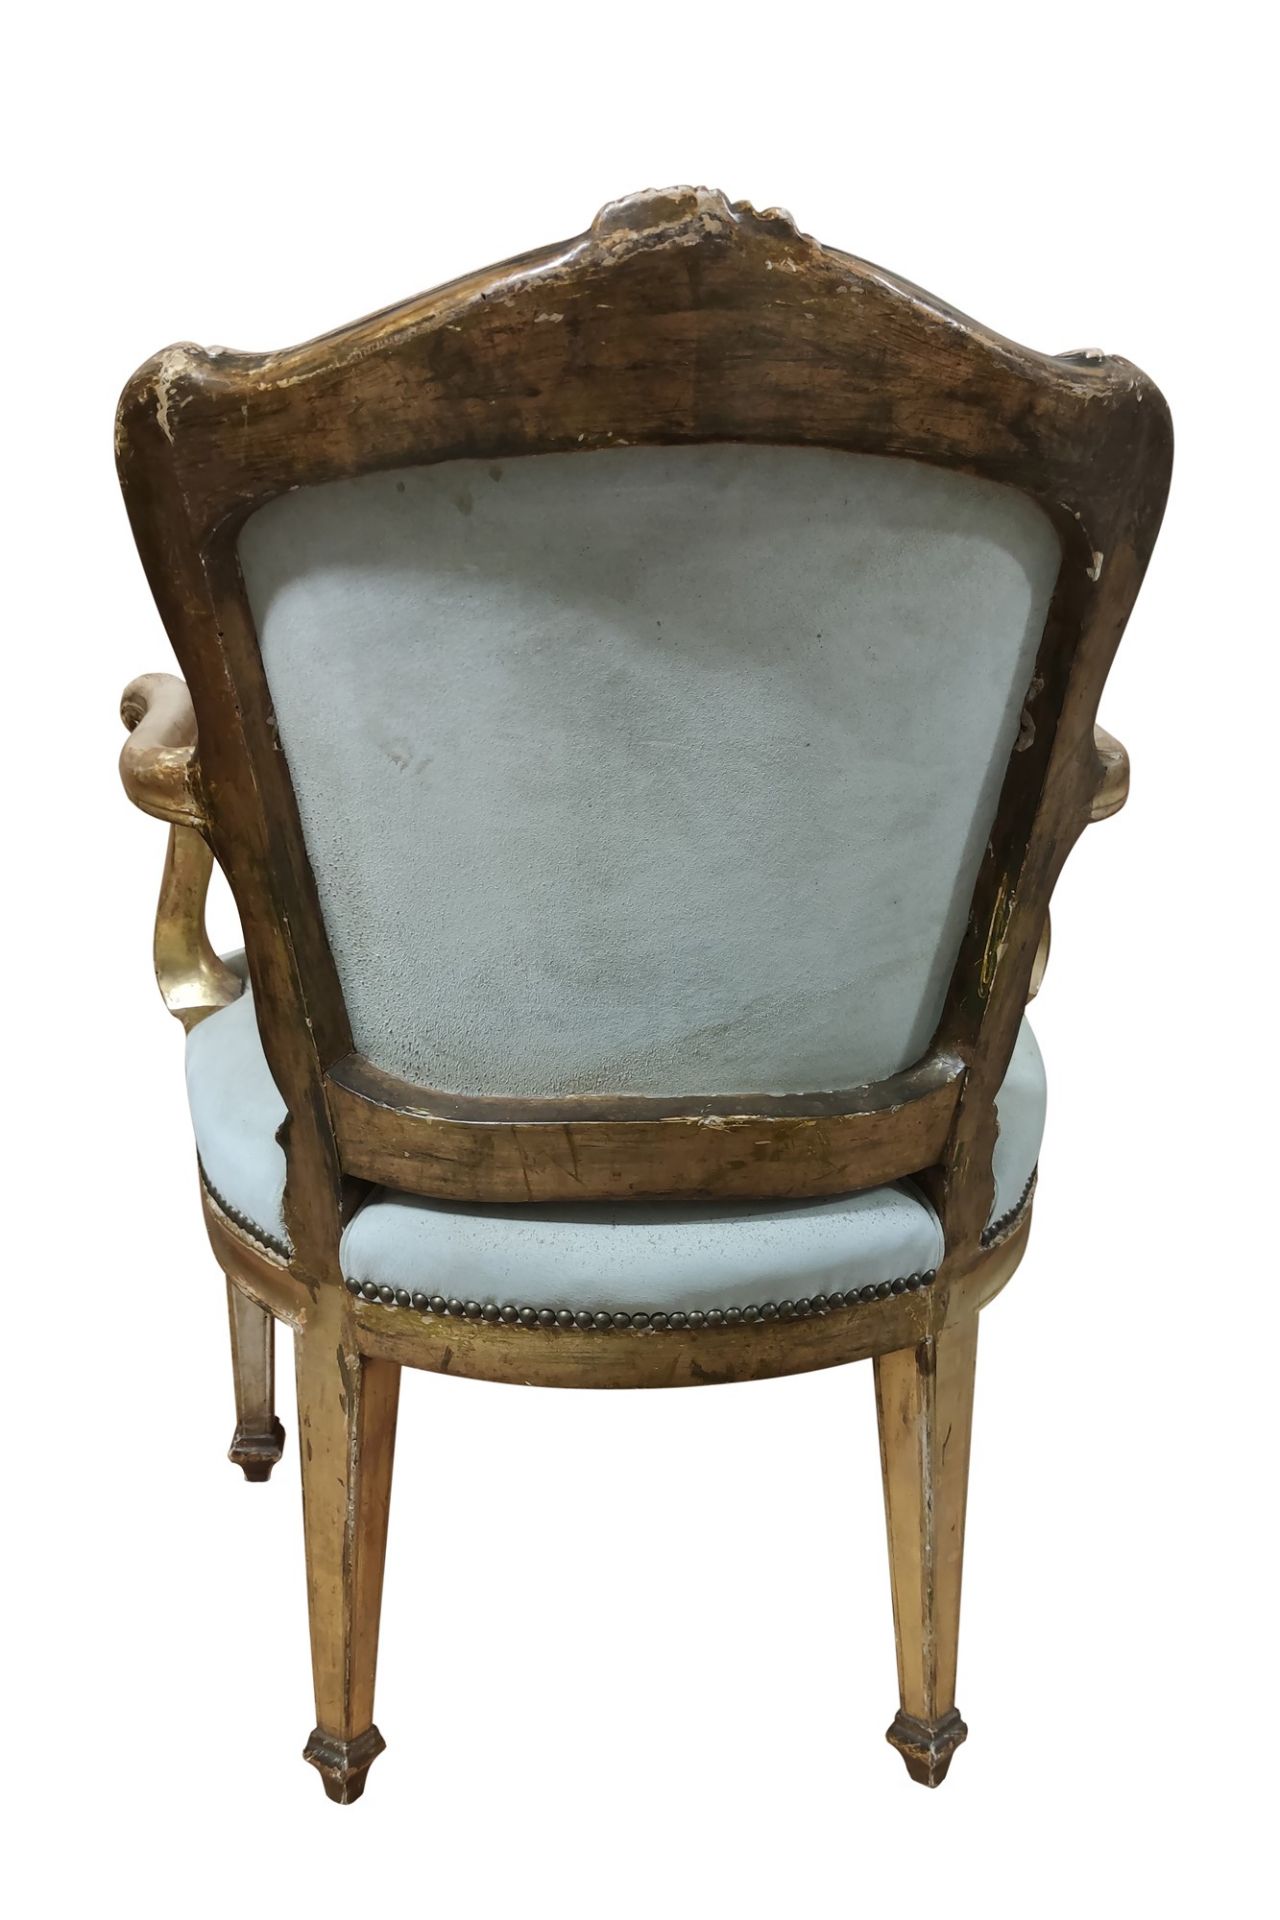 Armchair in gilded wood, late 18th century - Image 3 of 5